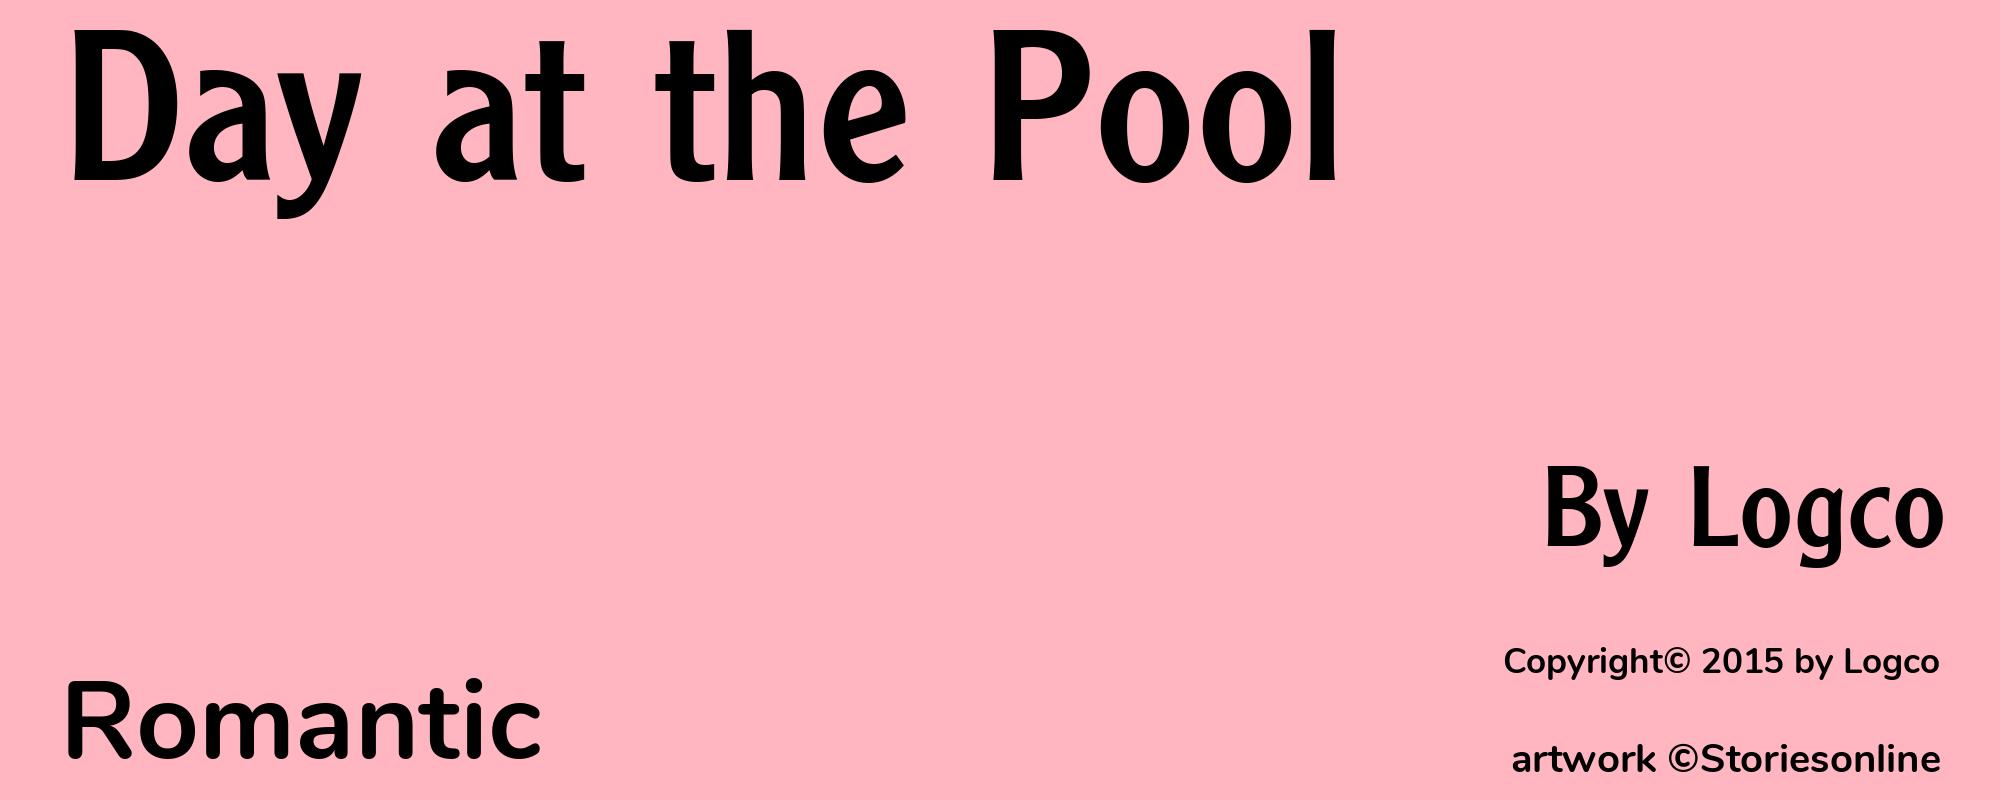 Day at the Pool - Cover